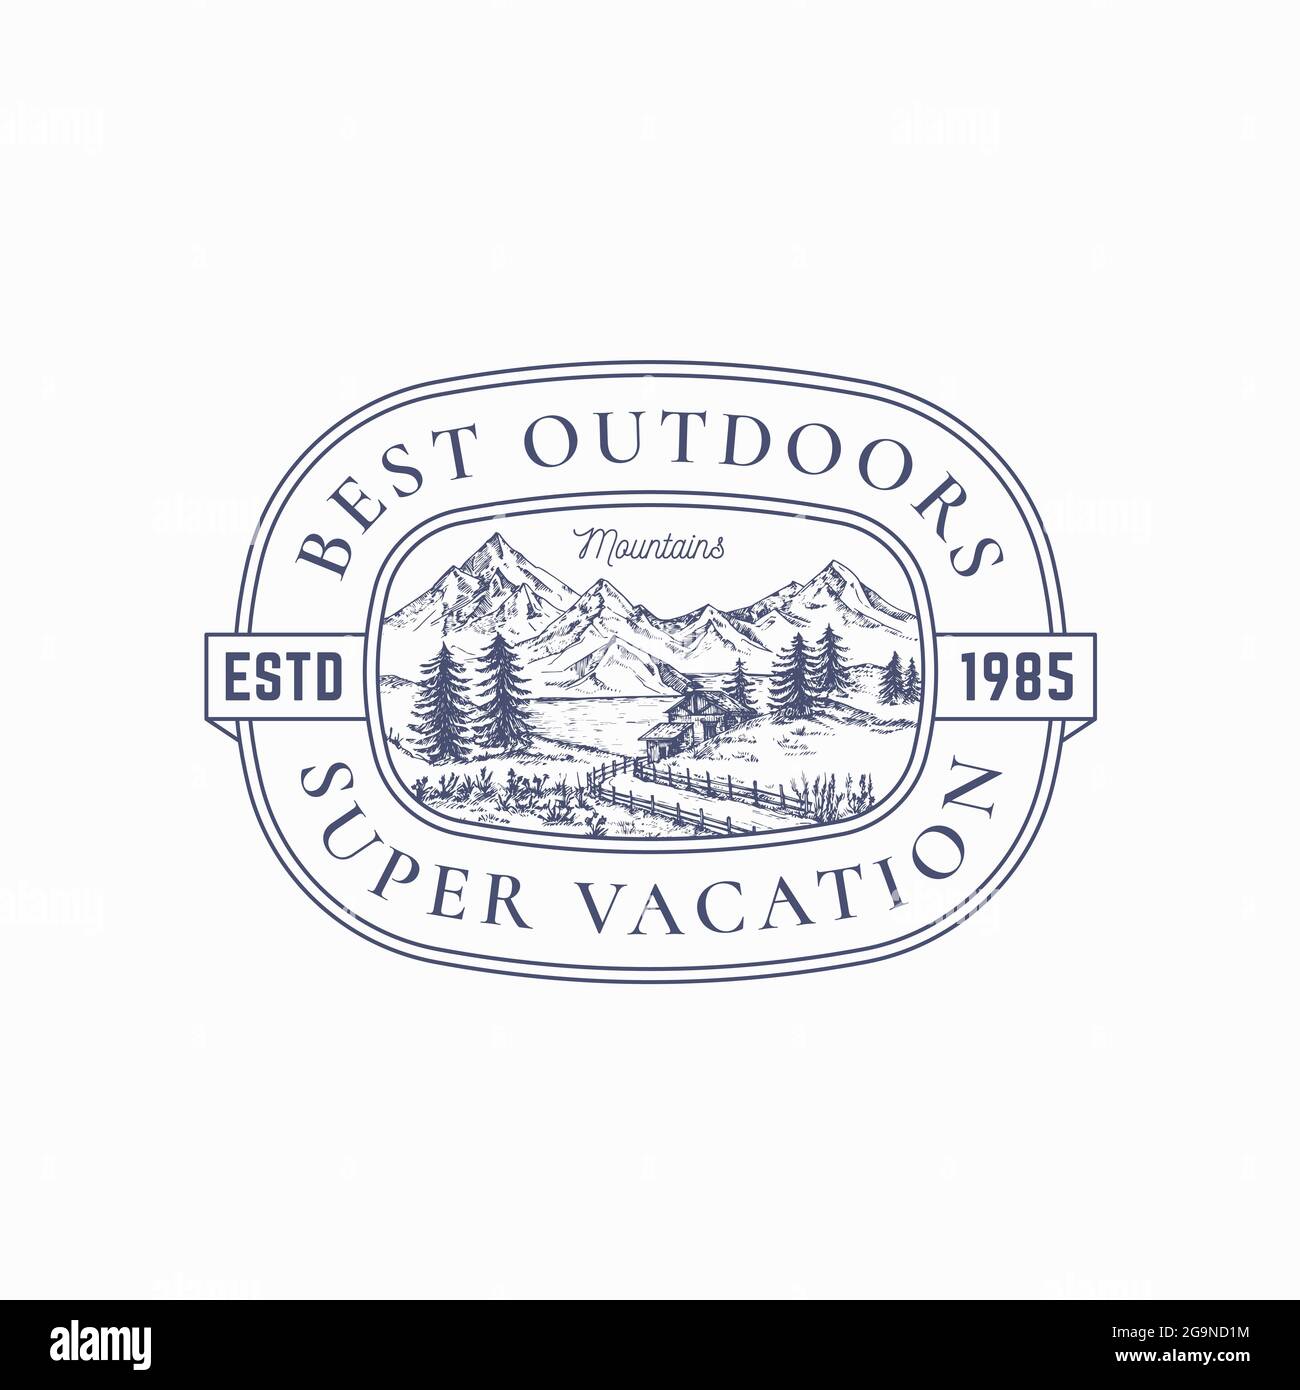 Outdoor Vacation Frame Badge or Logo Template. Hand Drawn Cabin in the Woods and Mountains Landscape Sketch with Retro Typography and Borders. Vintage Stock Vector